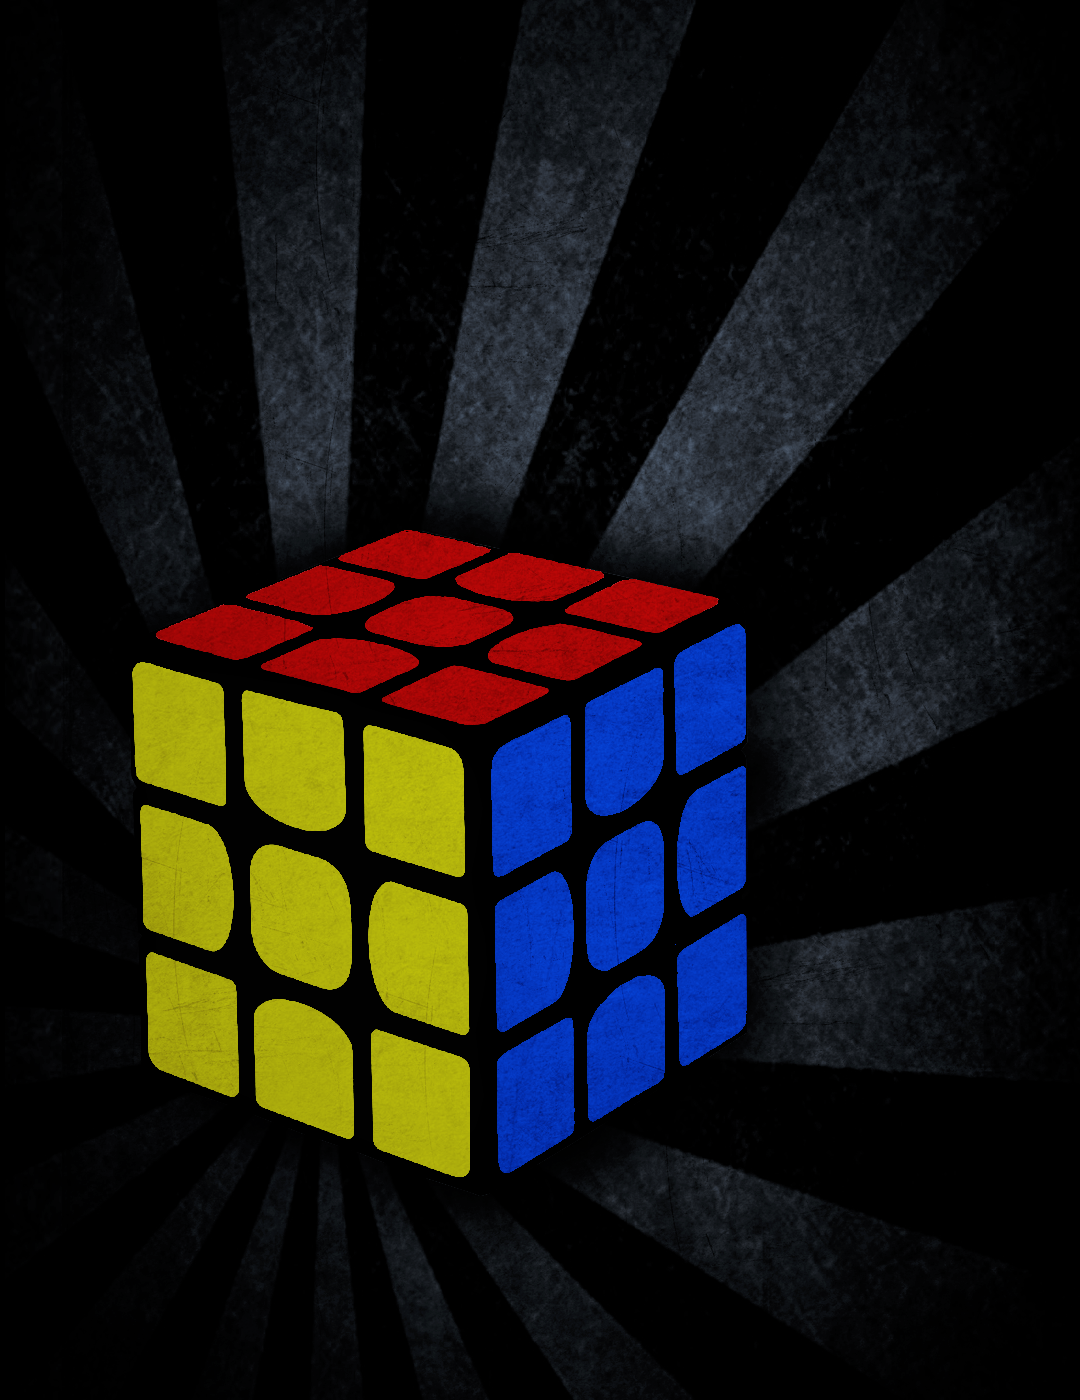 Minimalist Rubik's Cube phone wallpaper I made if you can guess